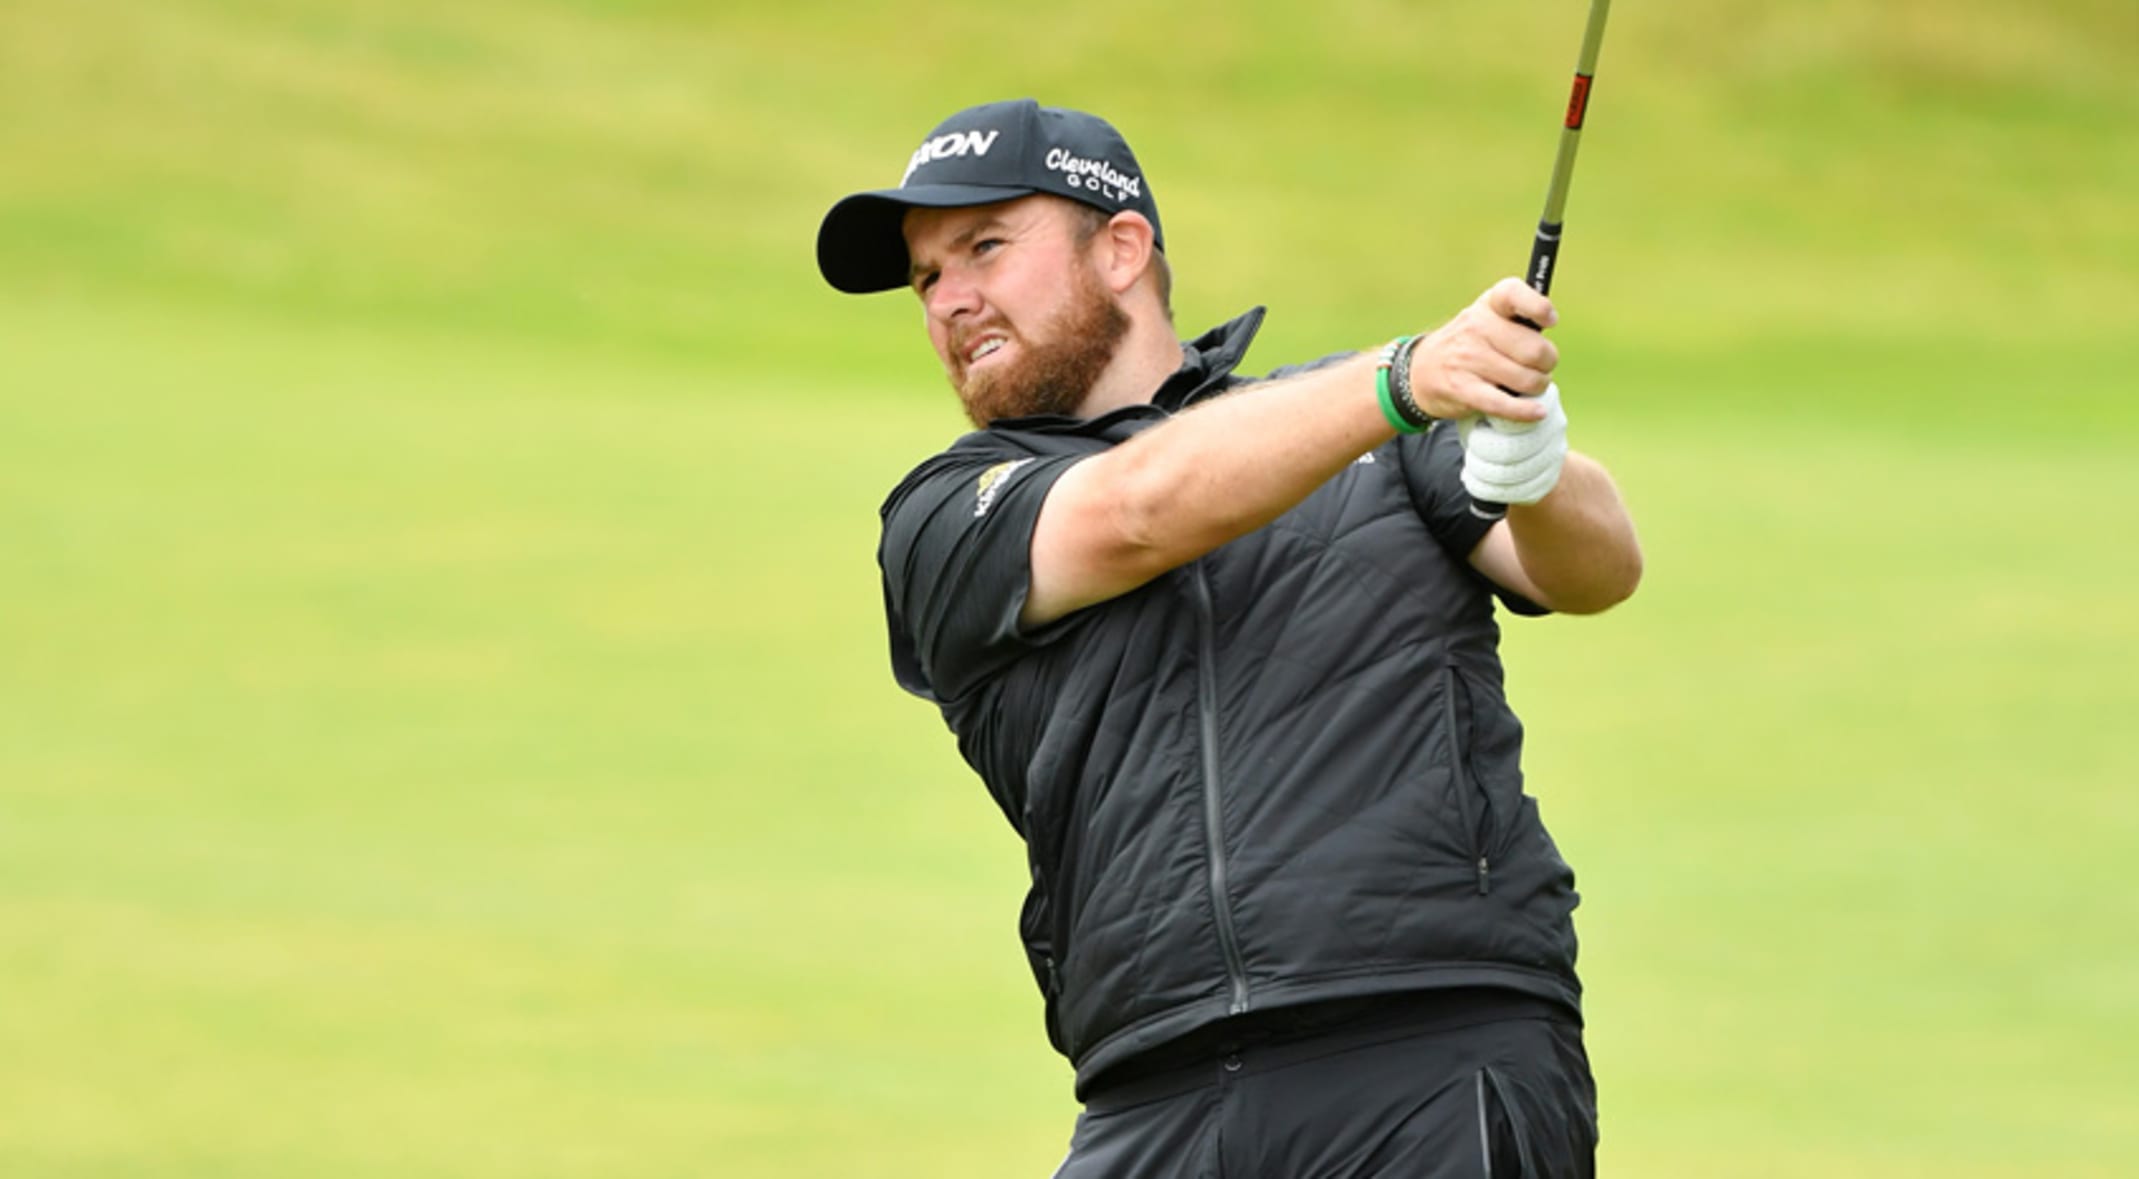 Shane Lowry wins The Open Championship